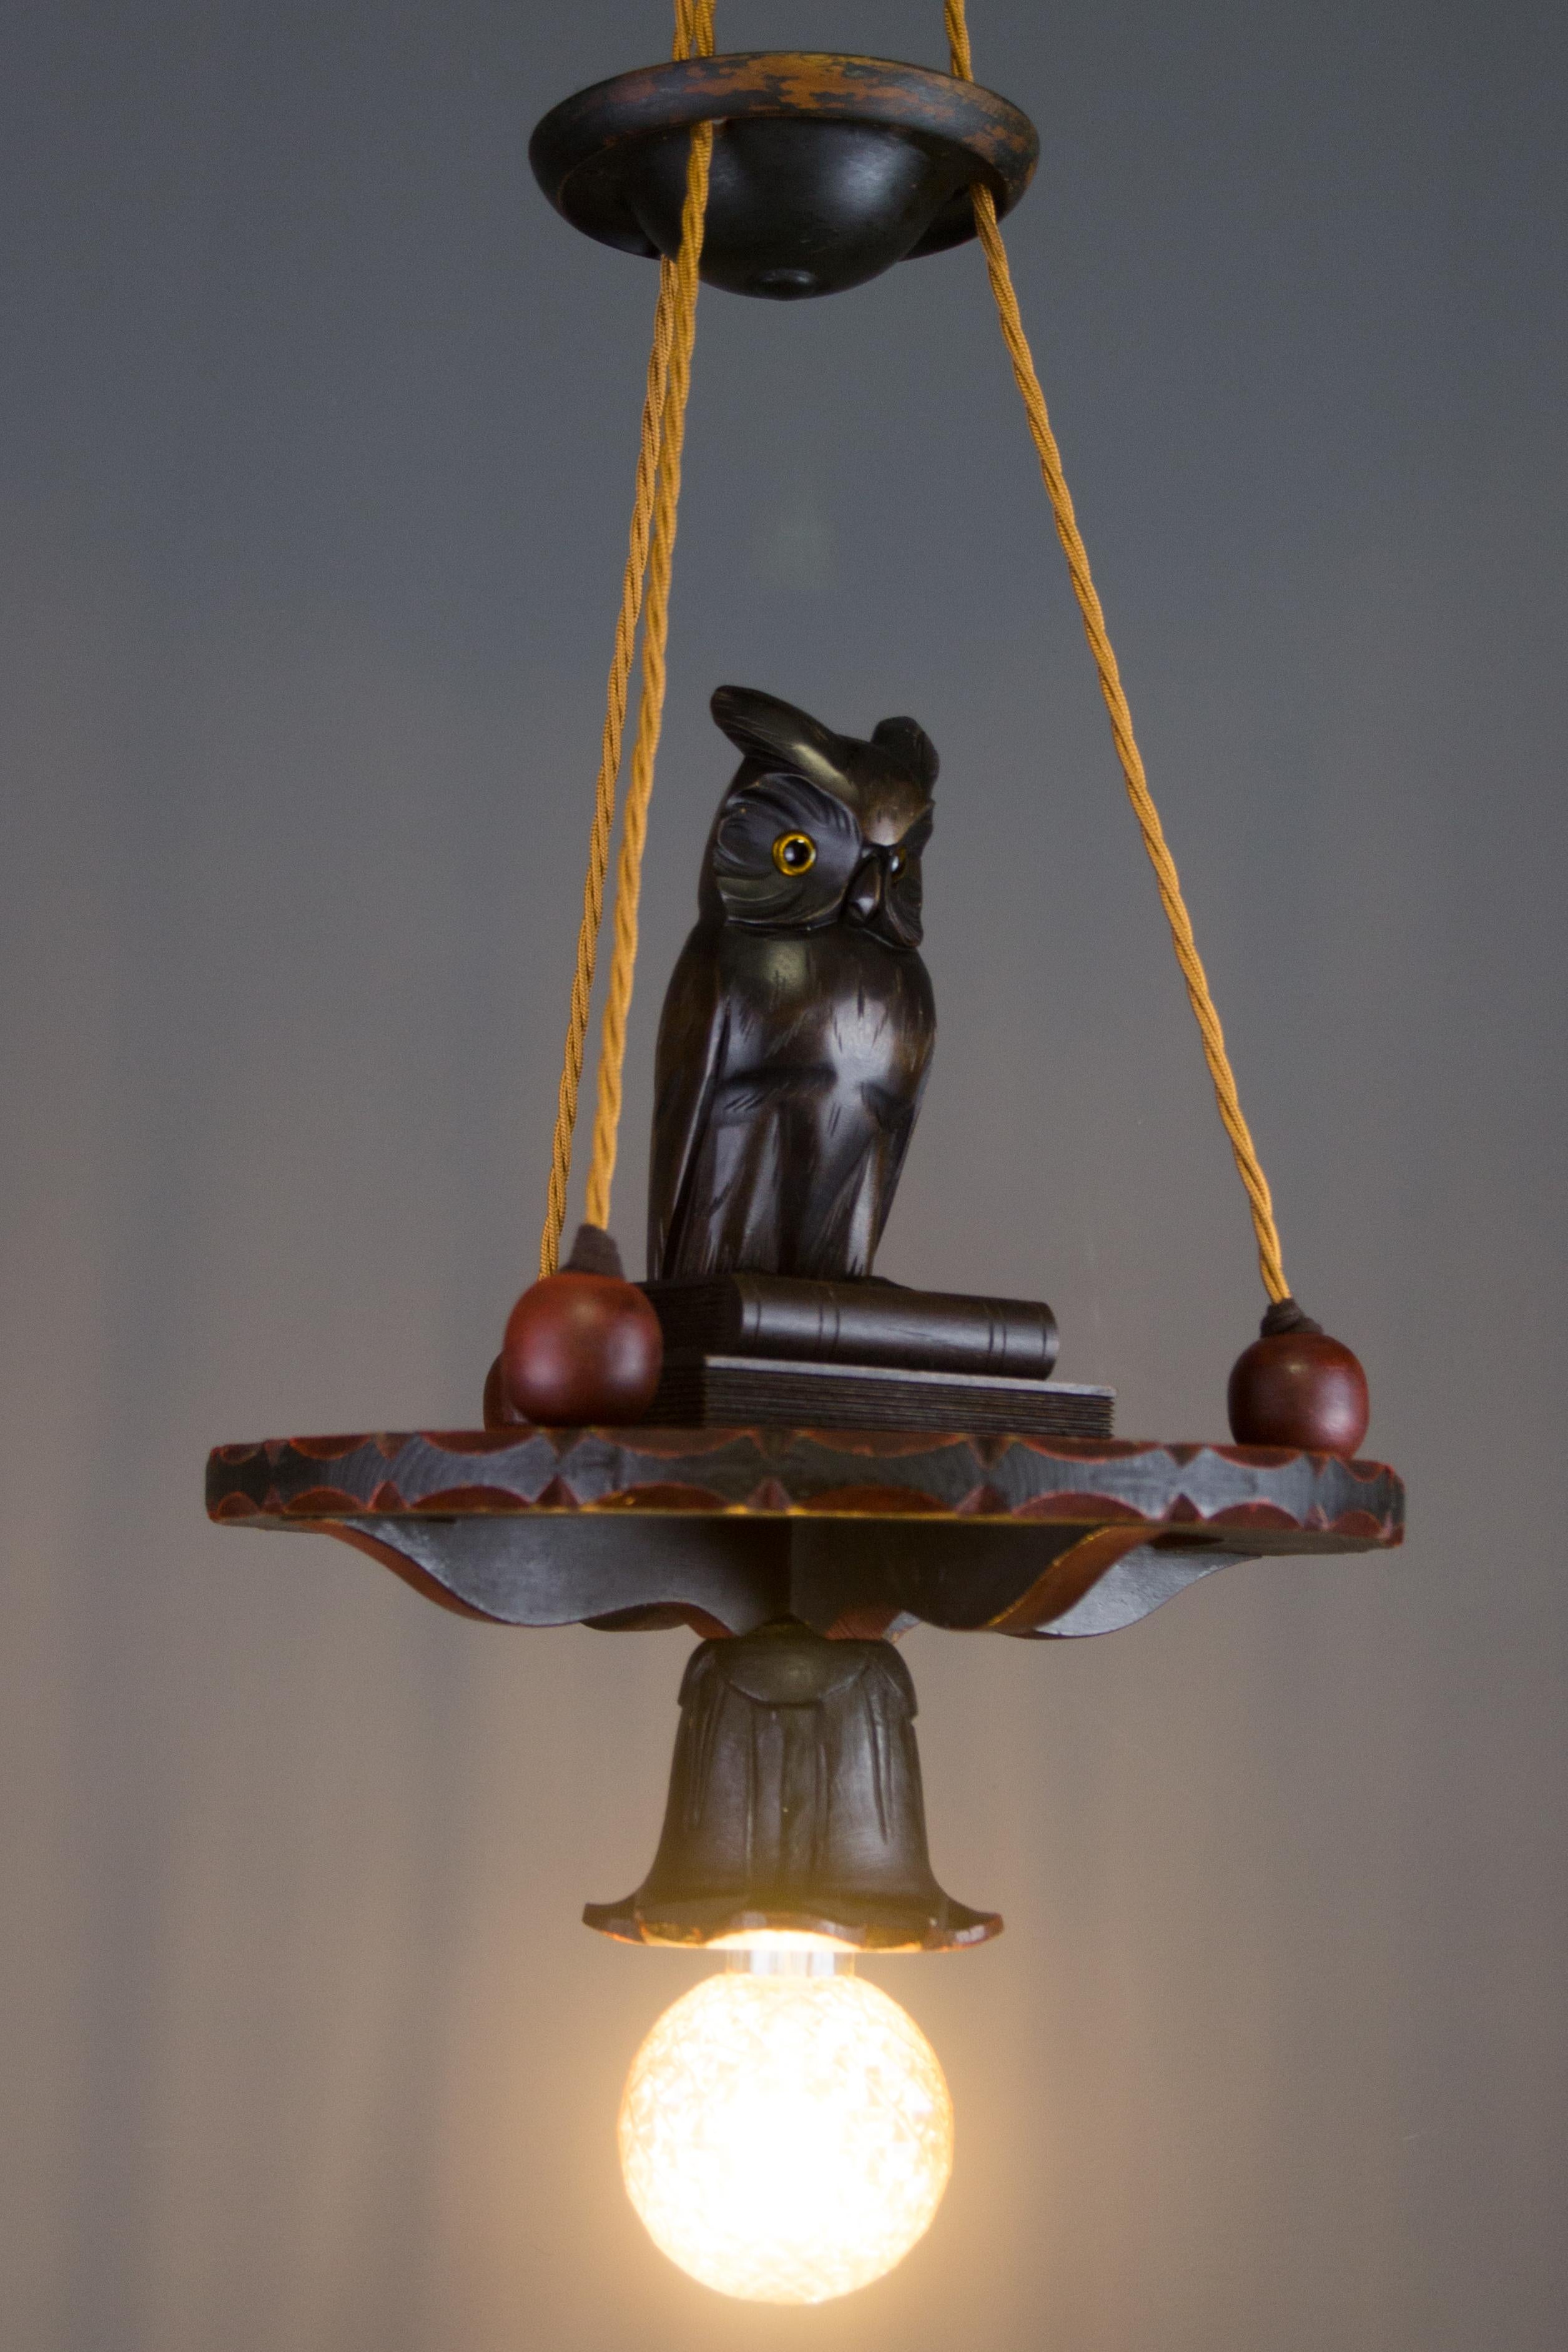 German Hand Carved Wooden Pendant Light Chandelier with Owl Sculpture, 1920s 1